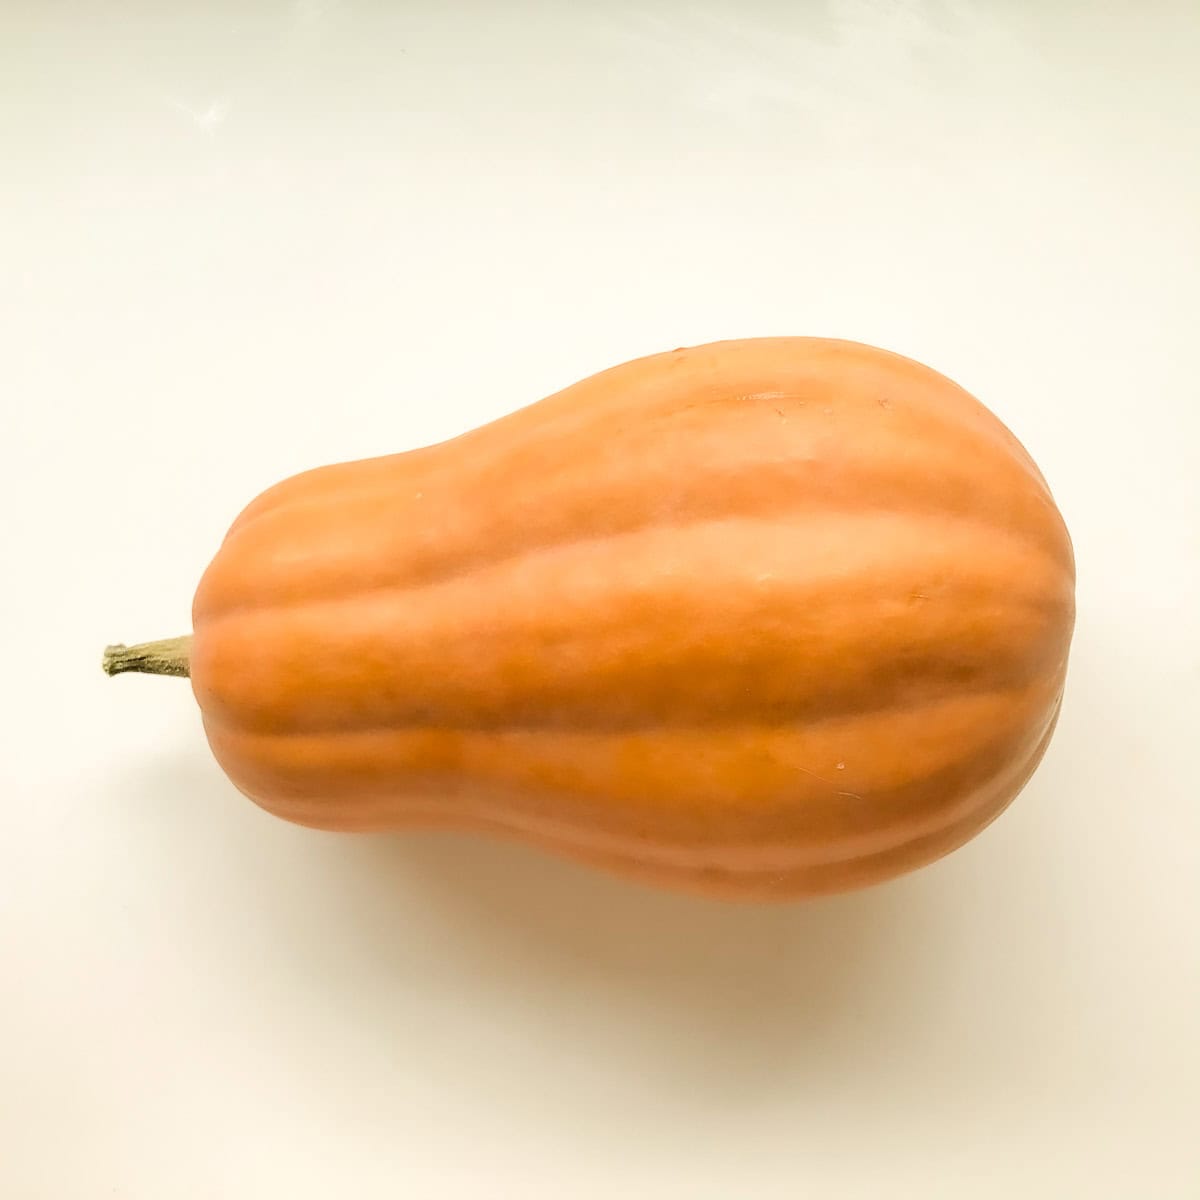 An image of a french squash on a white countertop.